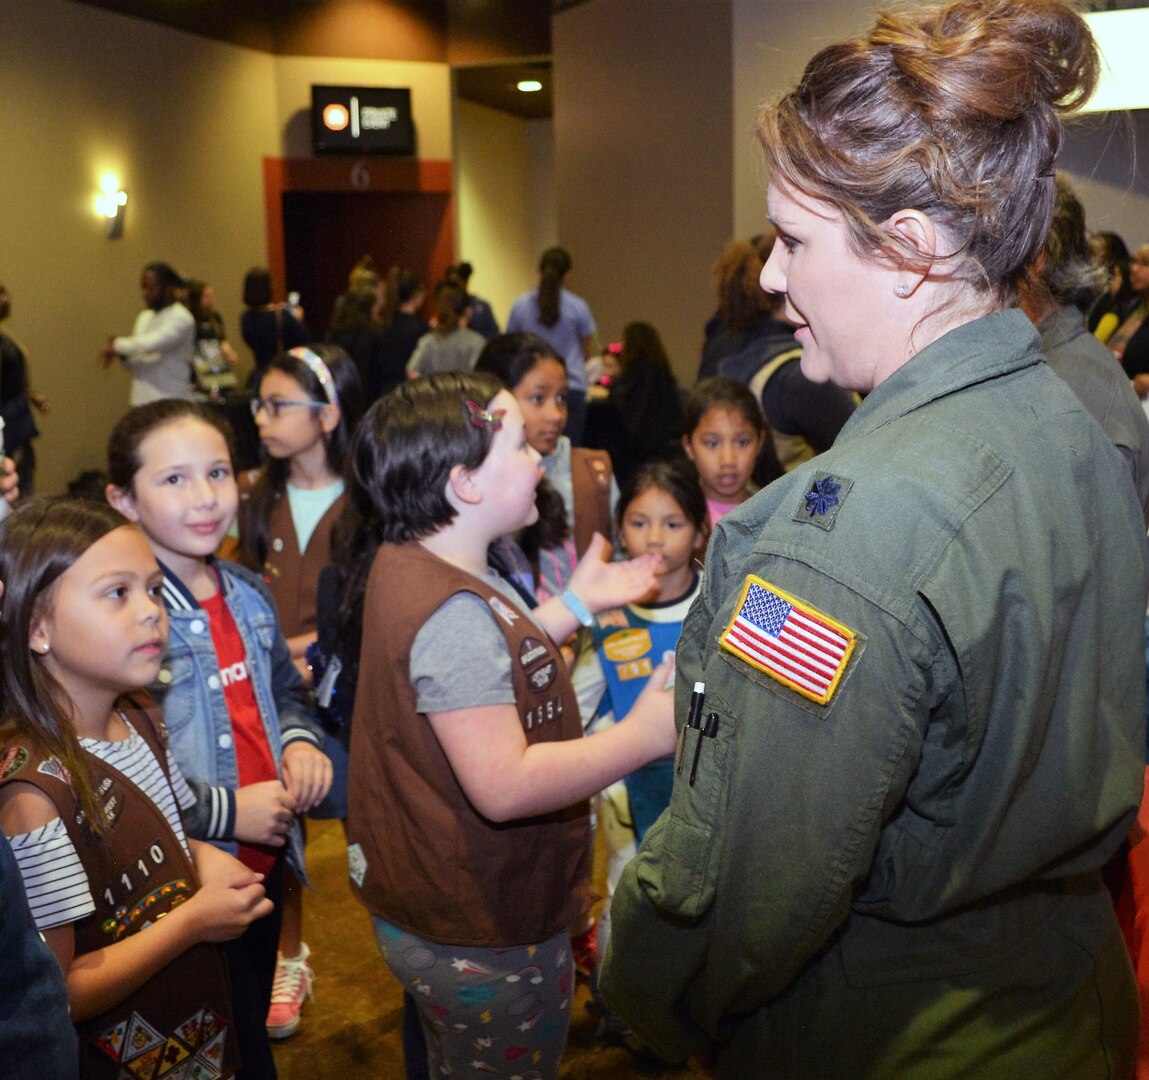 Lt. Col. Kari Hill, a C-5M Super Galaxy aircraft pilot and squadron commander with the 433rd Operations Support Squadron, Joint Base San Antonio-Lackland, talks, one-on-one, with a group of girls attending the “Marvelous Women Don’t Need Capes” event. The event took place at the Alamo Drafthouse movie cinema March 23 in San Antonio. Hosted by the “Show them Everything Possible” Organization of San Antonio, the event creates a unique cultural and educational experience for youth to see various professions. At this event, S.T.E.P. introduces young girls to professional women heroes, who are “Marvelous” in their profession in the San Antonio area.